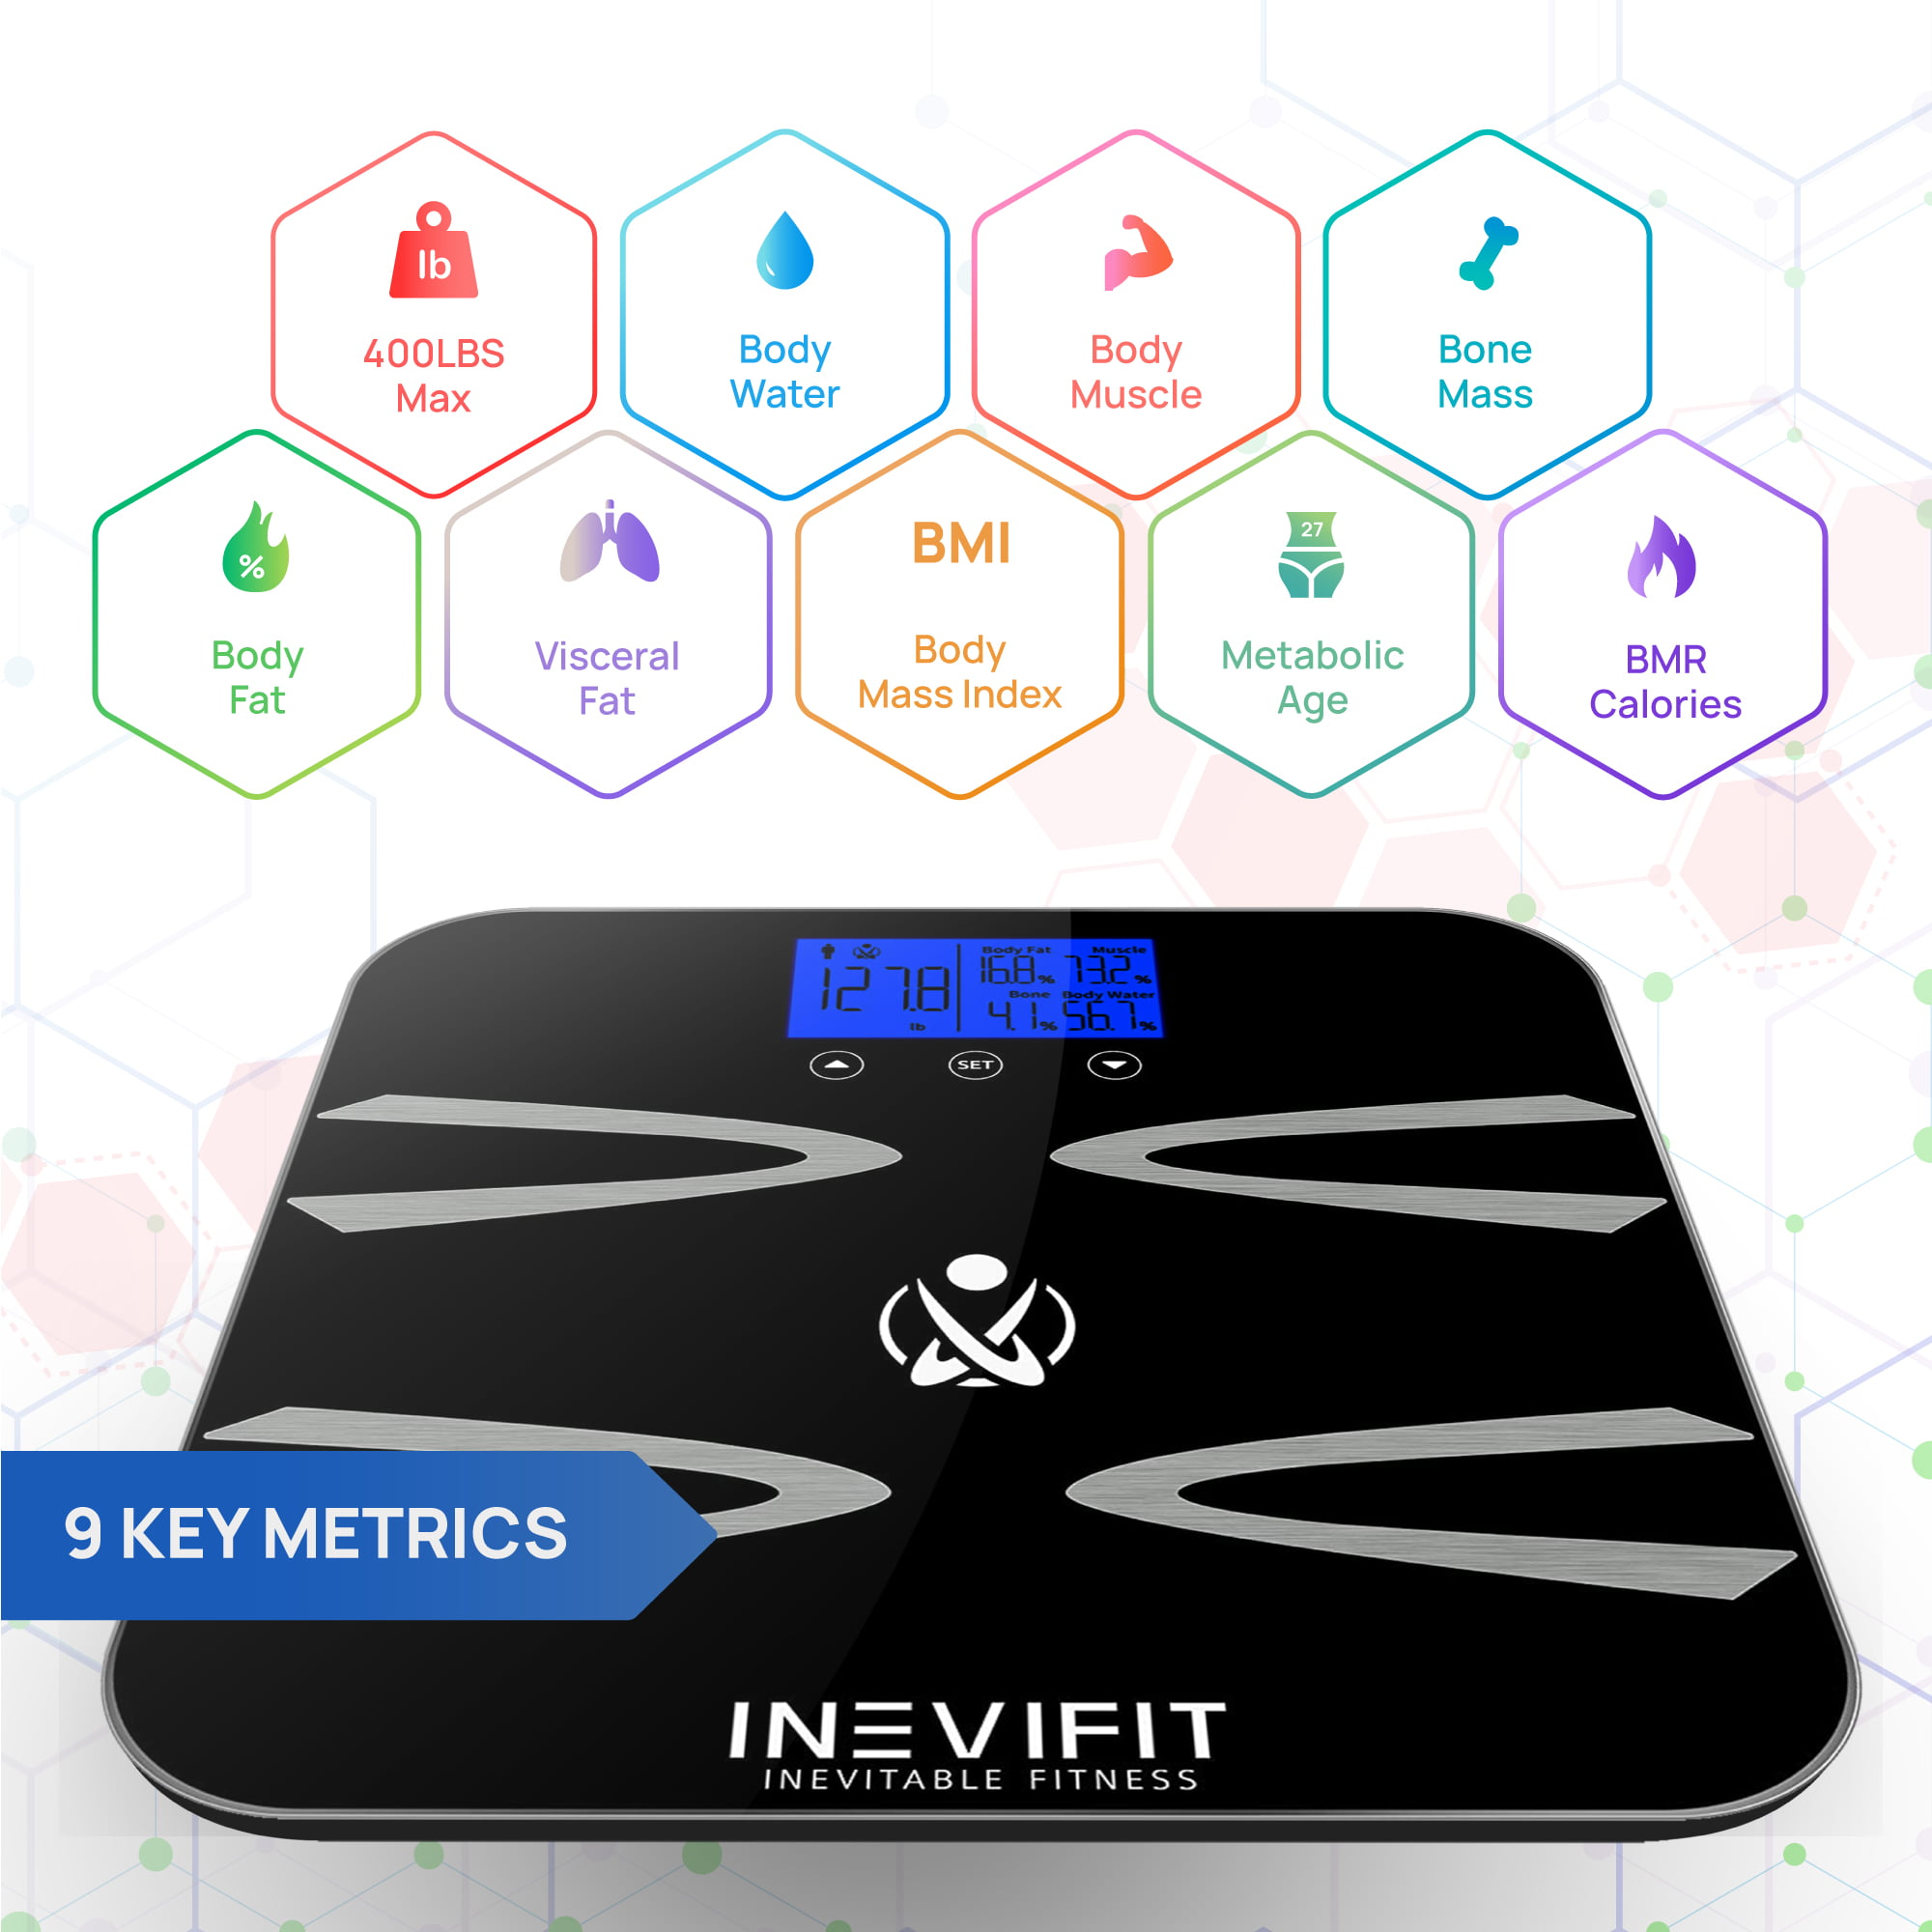 INEVIFIT Smart Body Fat Scale, Highly Accurate Bluetooth Digital Bathroom  Body Composition Analyzer, Measures Weight, Body Fat, Water, Muscle